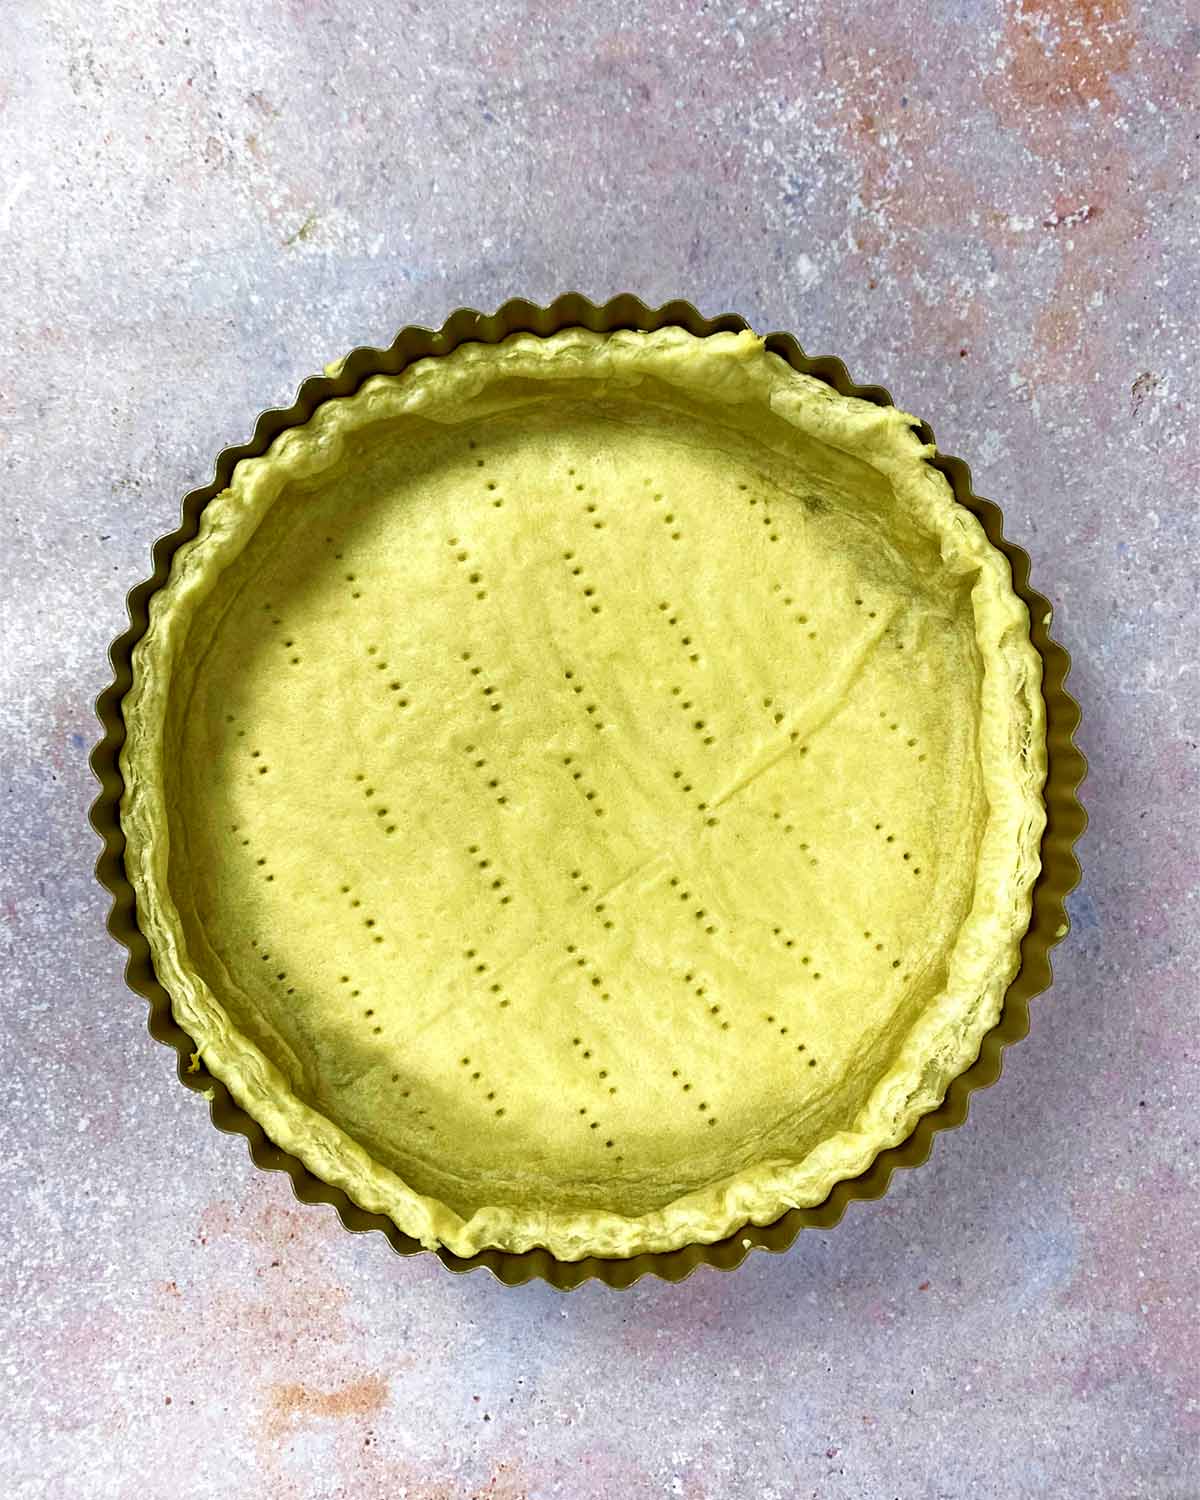 Baked pastry in a pie tin.